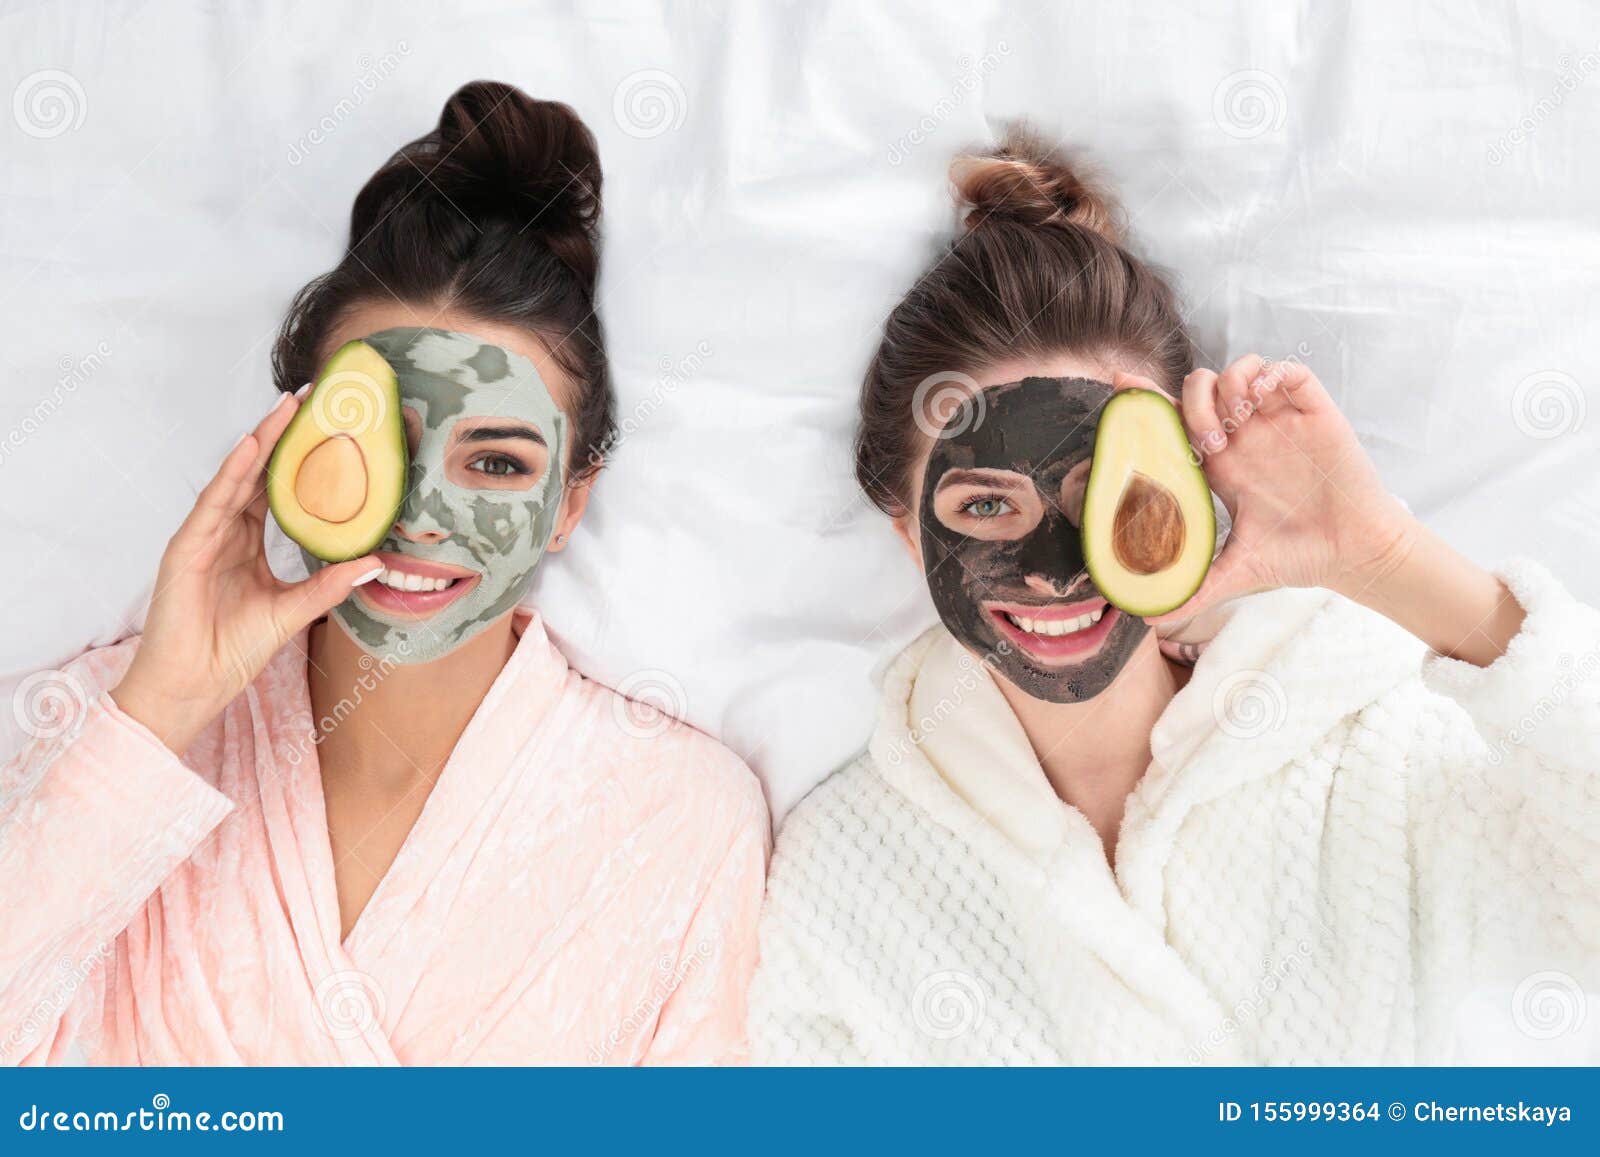 young friends with facial masks  fun on bed at pamper party, top view